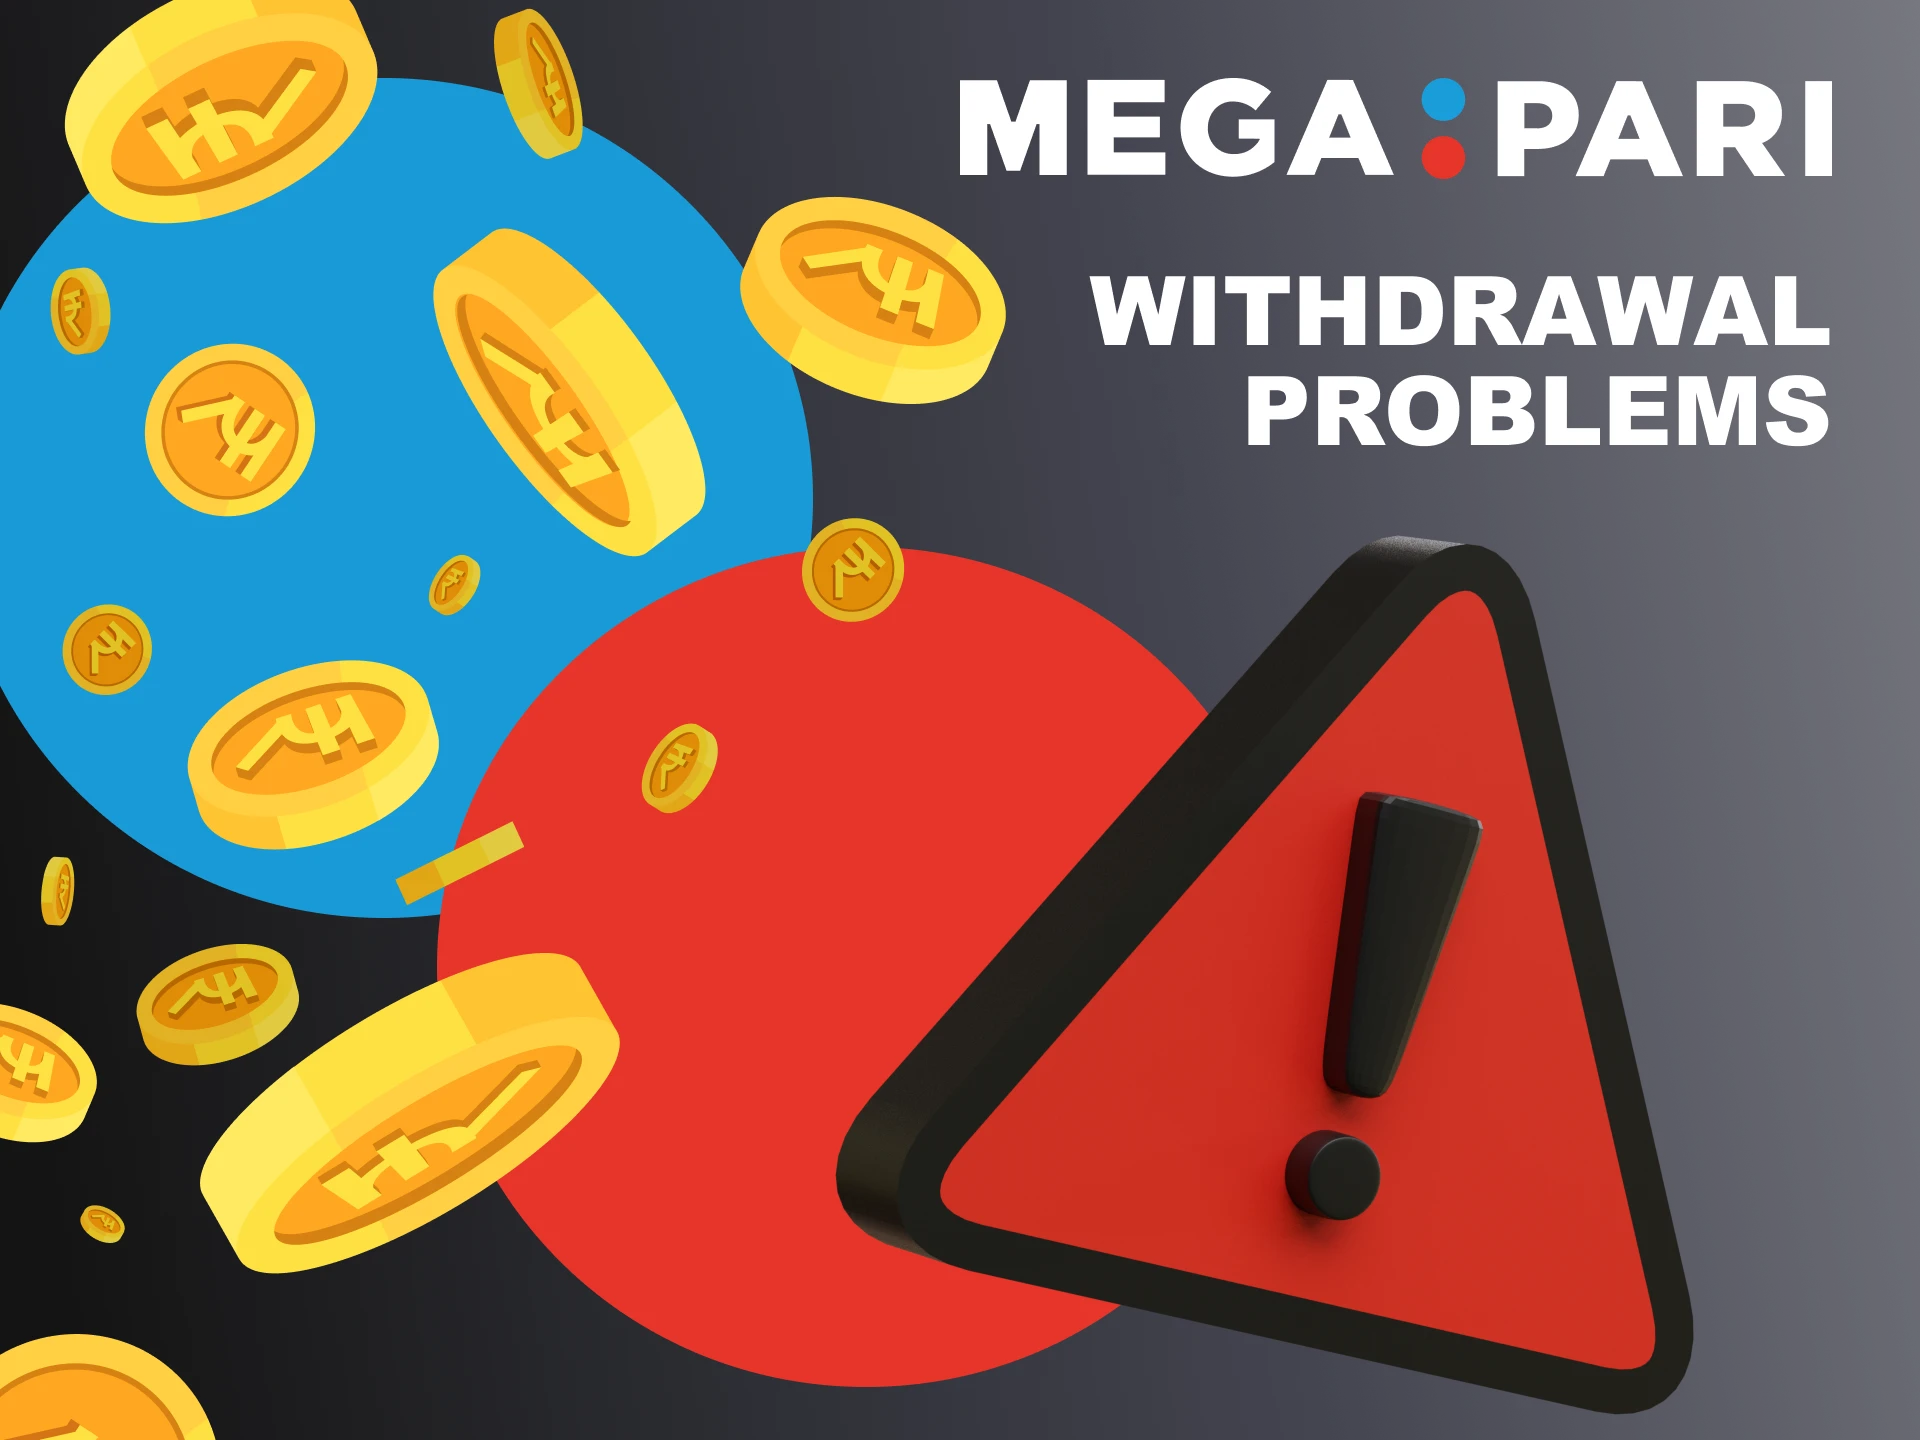 Read the main points at which you may have problems with withdrawal from Megapari.